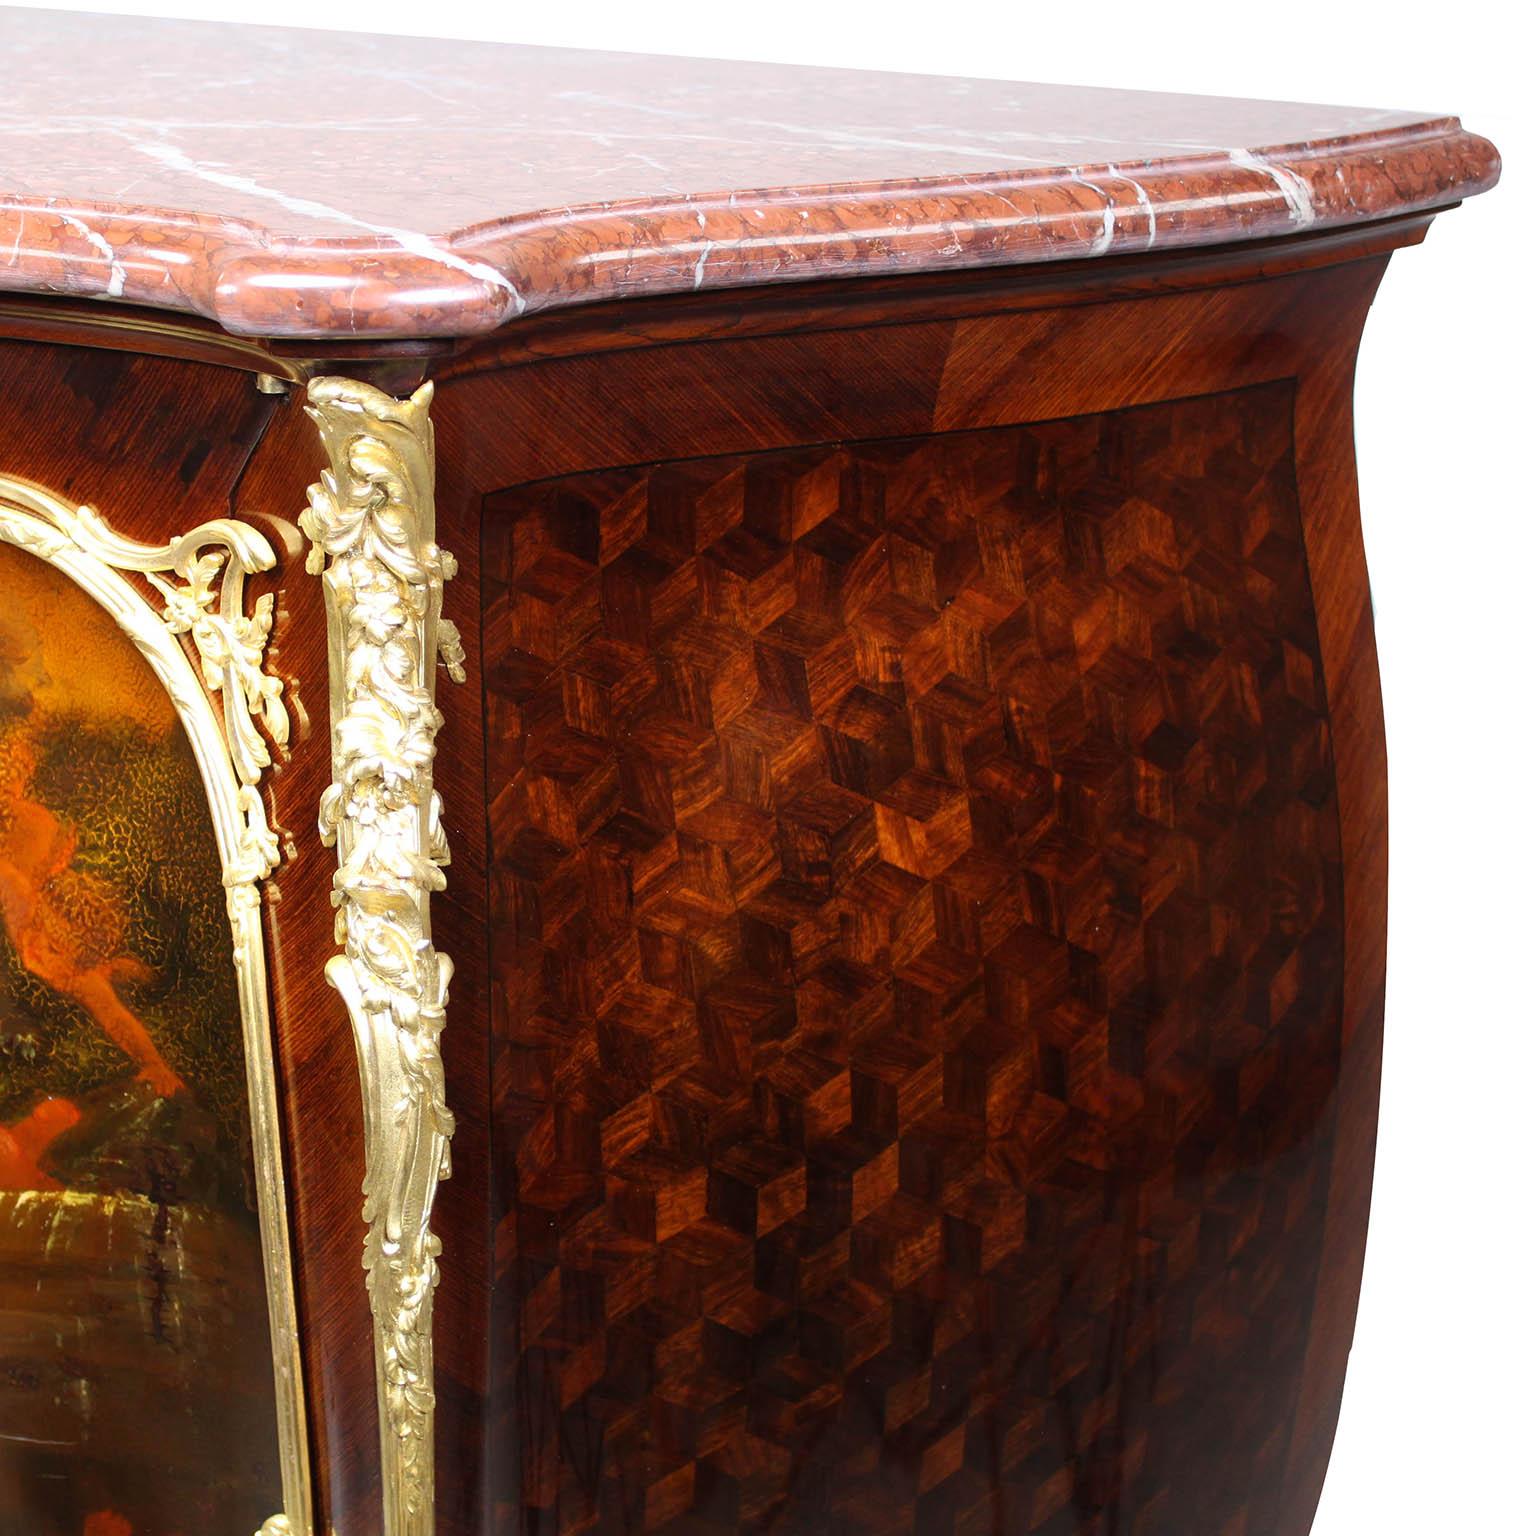 French 19th C. Louis XV Style Ormolu-Mounted Vernis Martin Cabinet by F. Linke For Sale 2